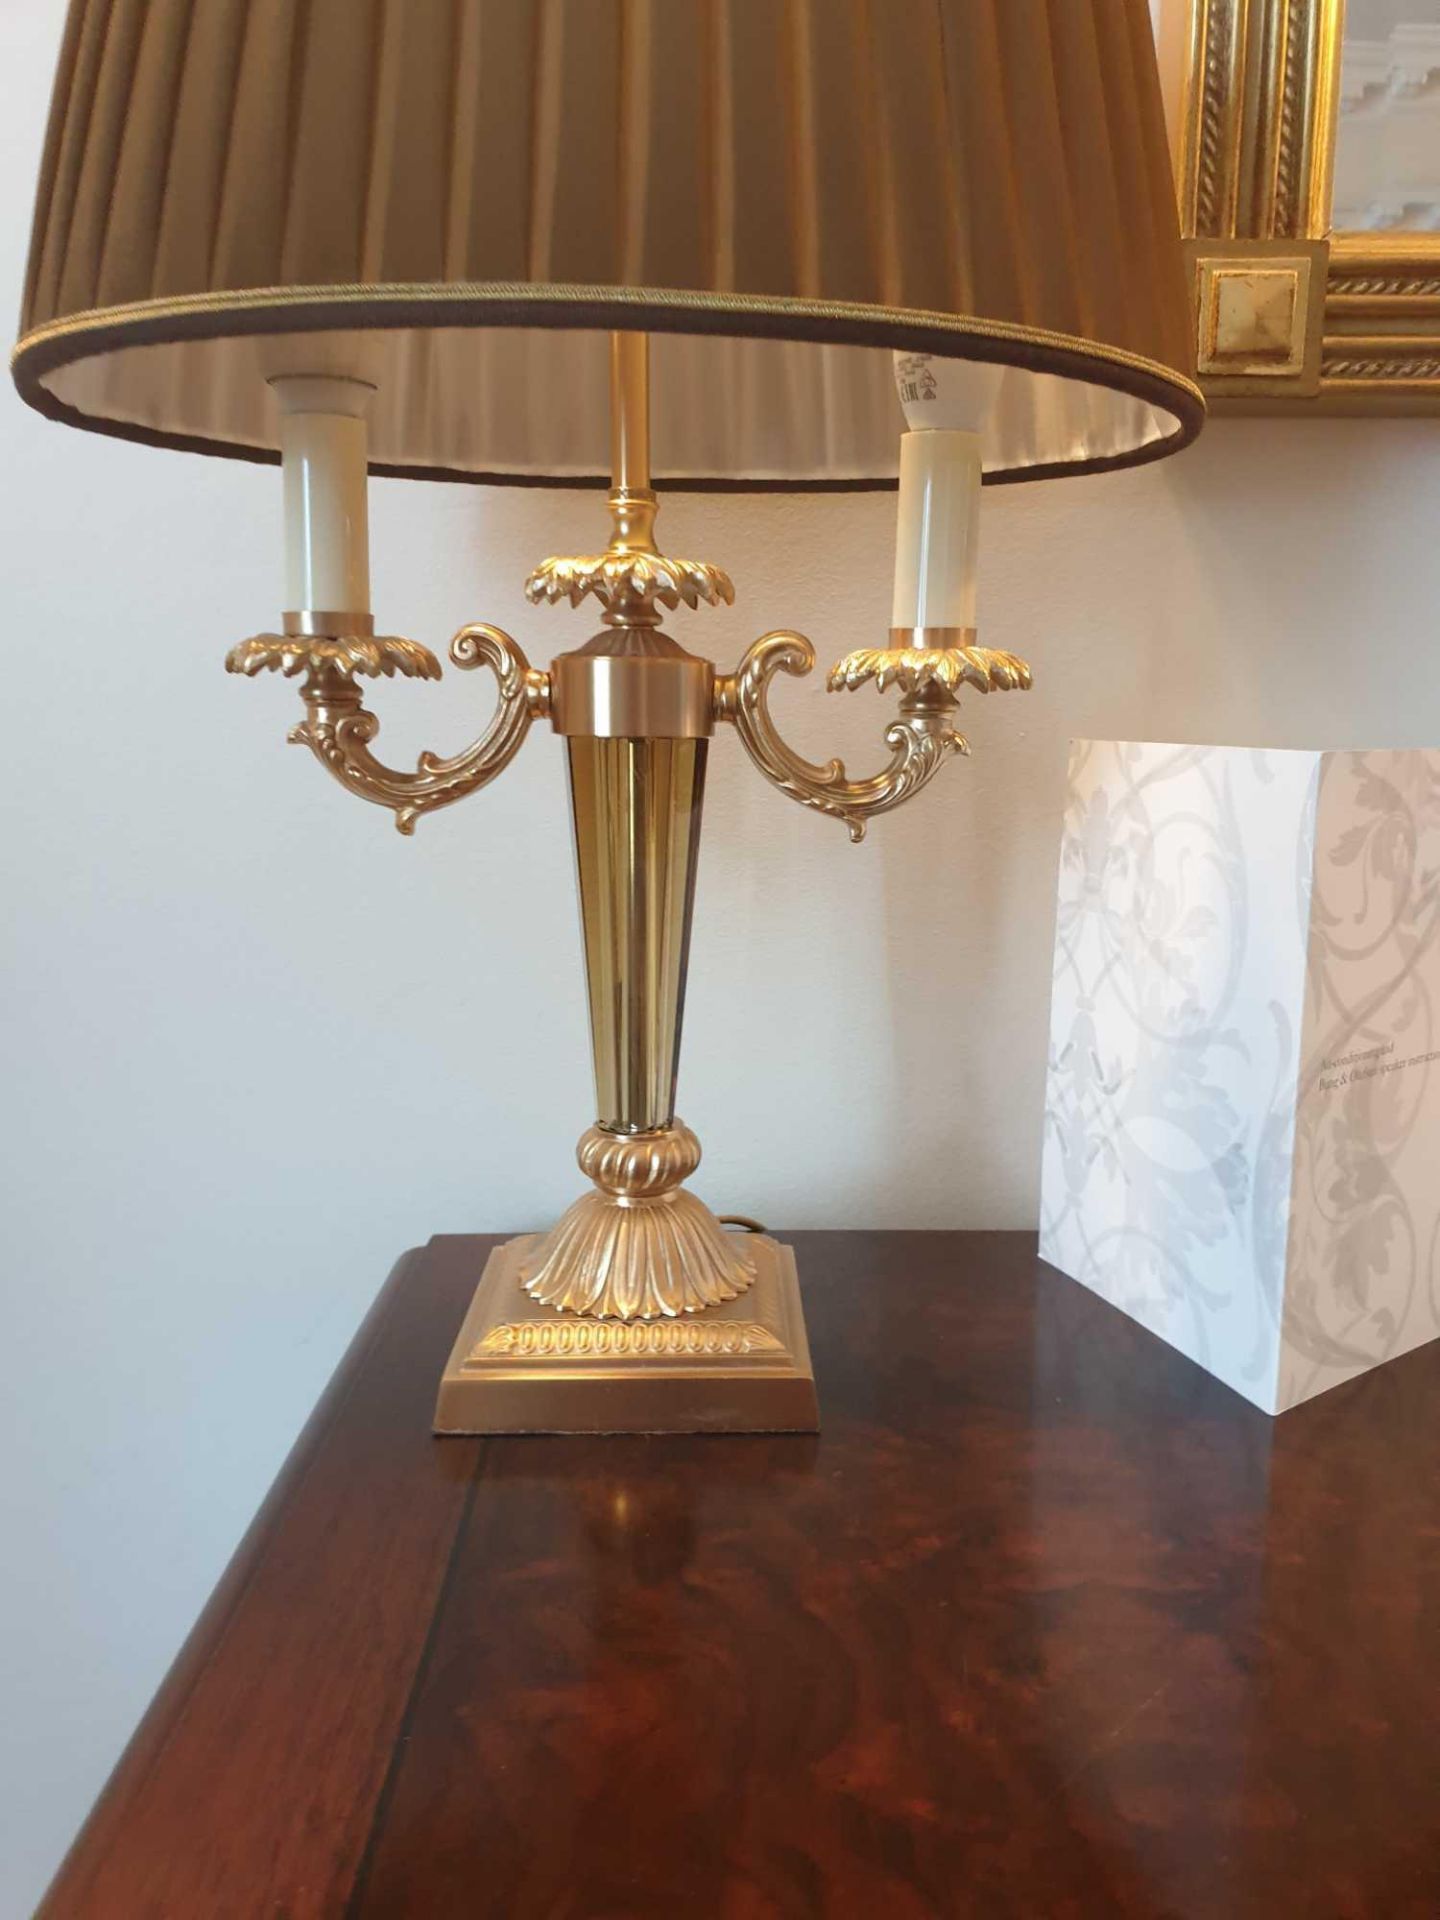 Laudarte Aretusa Twin Arm Table Lamp Bronze Lost-Wax Casting Antique Gilt Bronze Base And Column And - Image 2 of 3